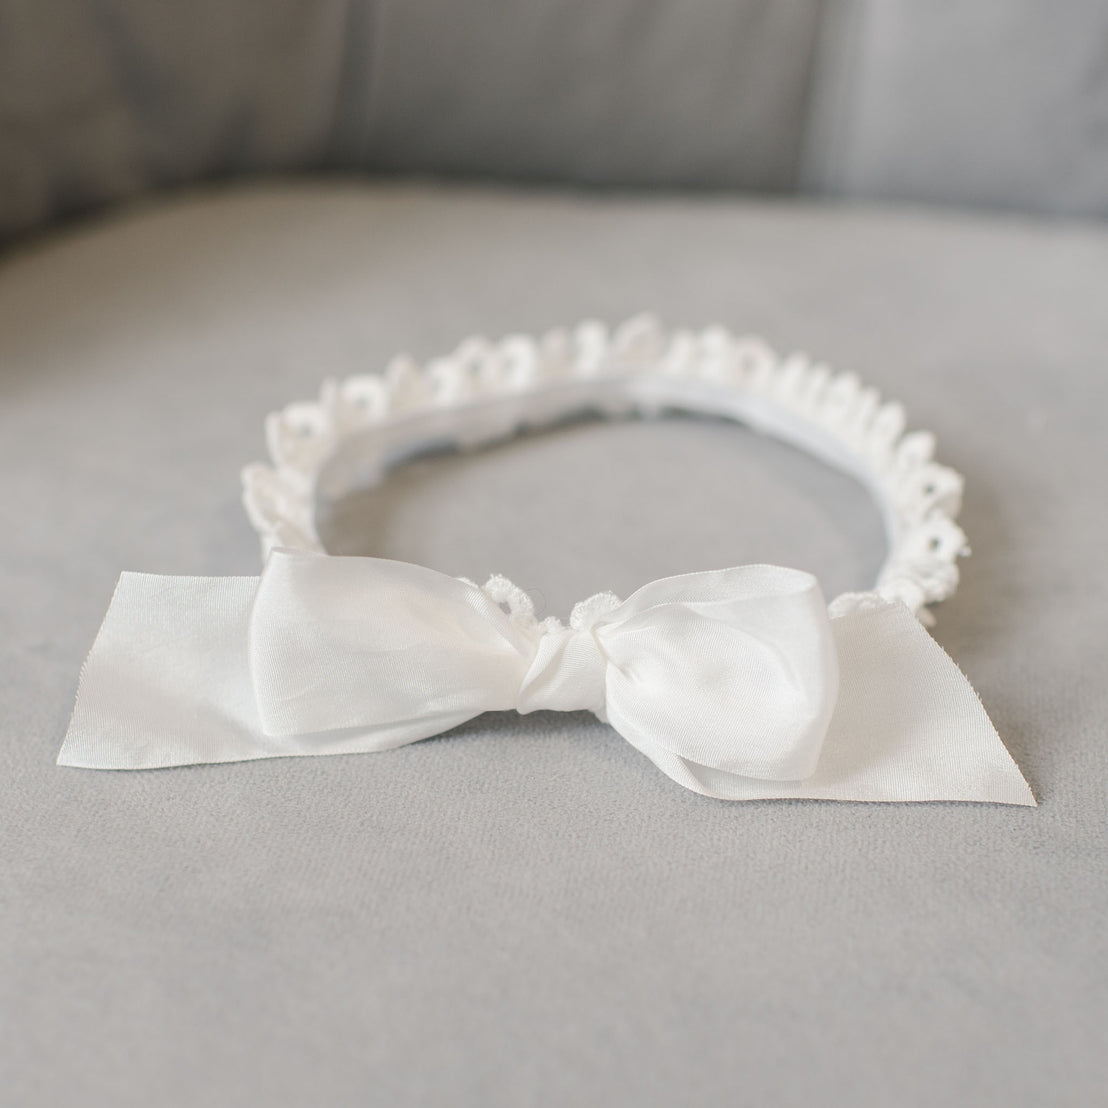 A delicate Grace Headband adorned with a large silk bow and small floral embellishments, perfect as a baby shower gift, resting on a soft gray cushioned background.